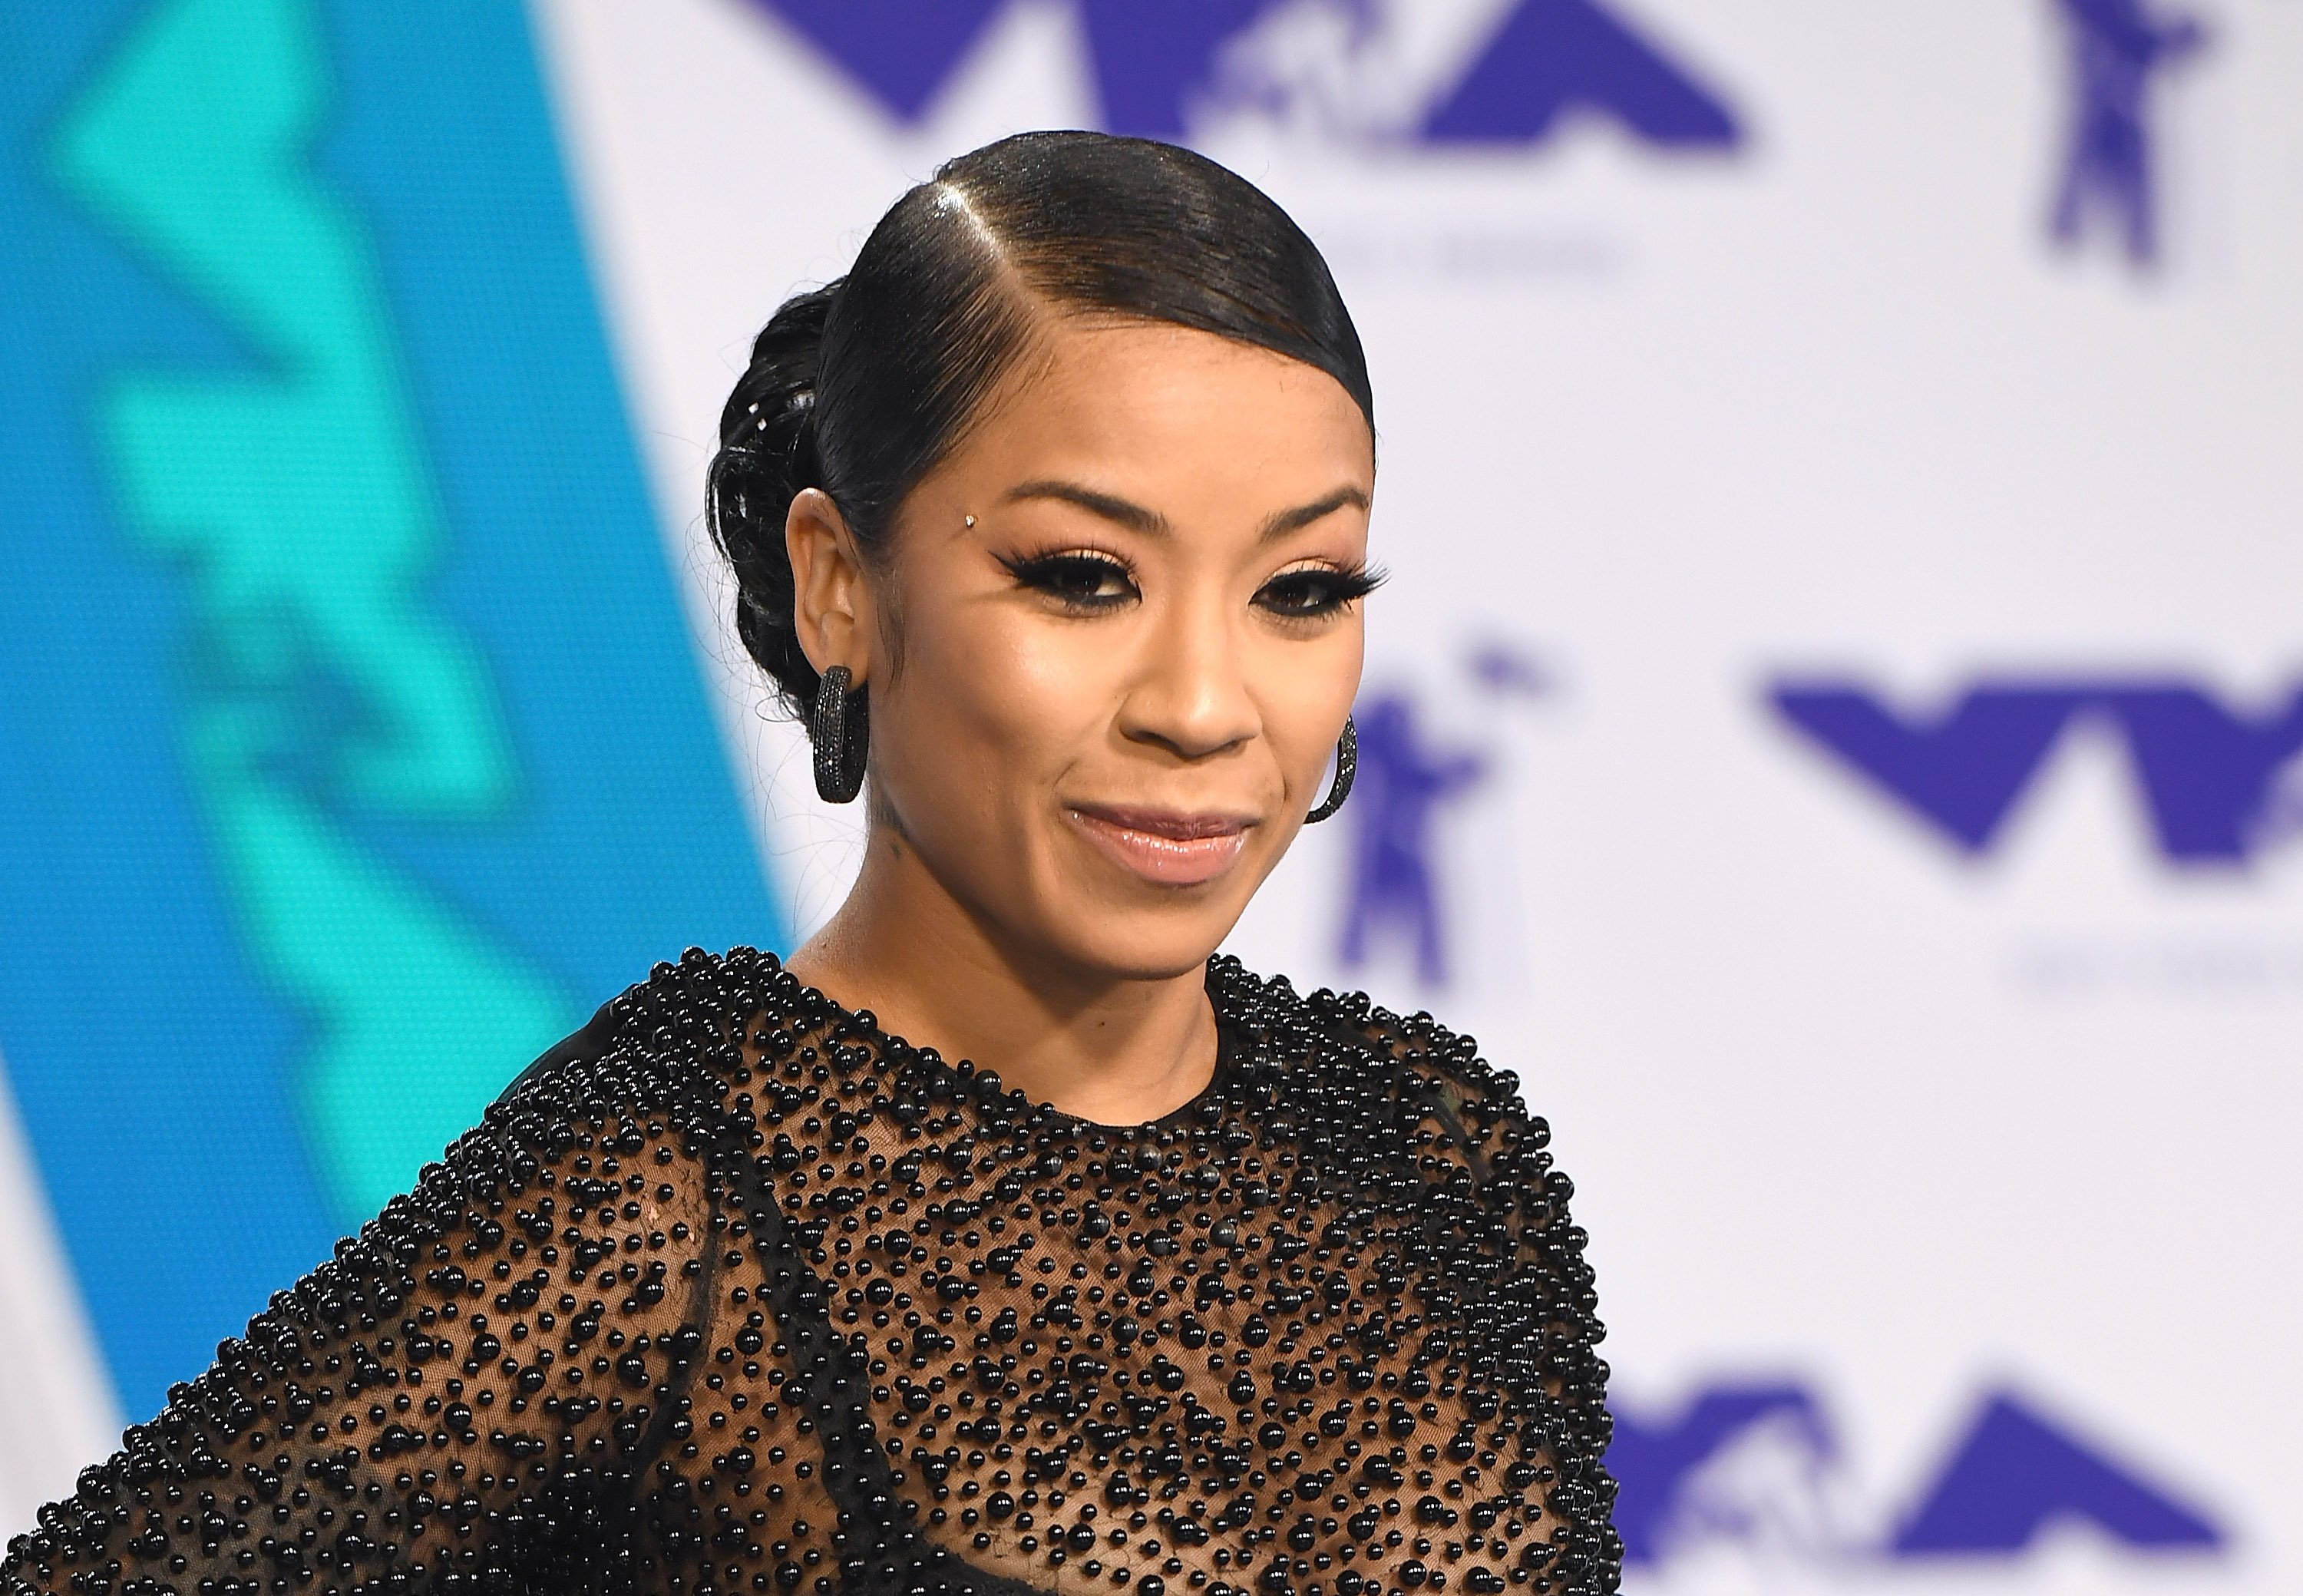 Keyshia Cole at the 2017 MTV Video Music Awards. | Photo: Getty Images